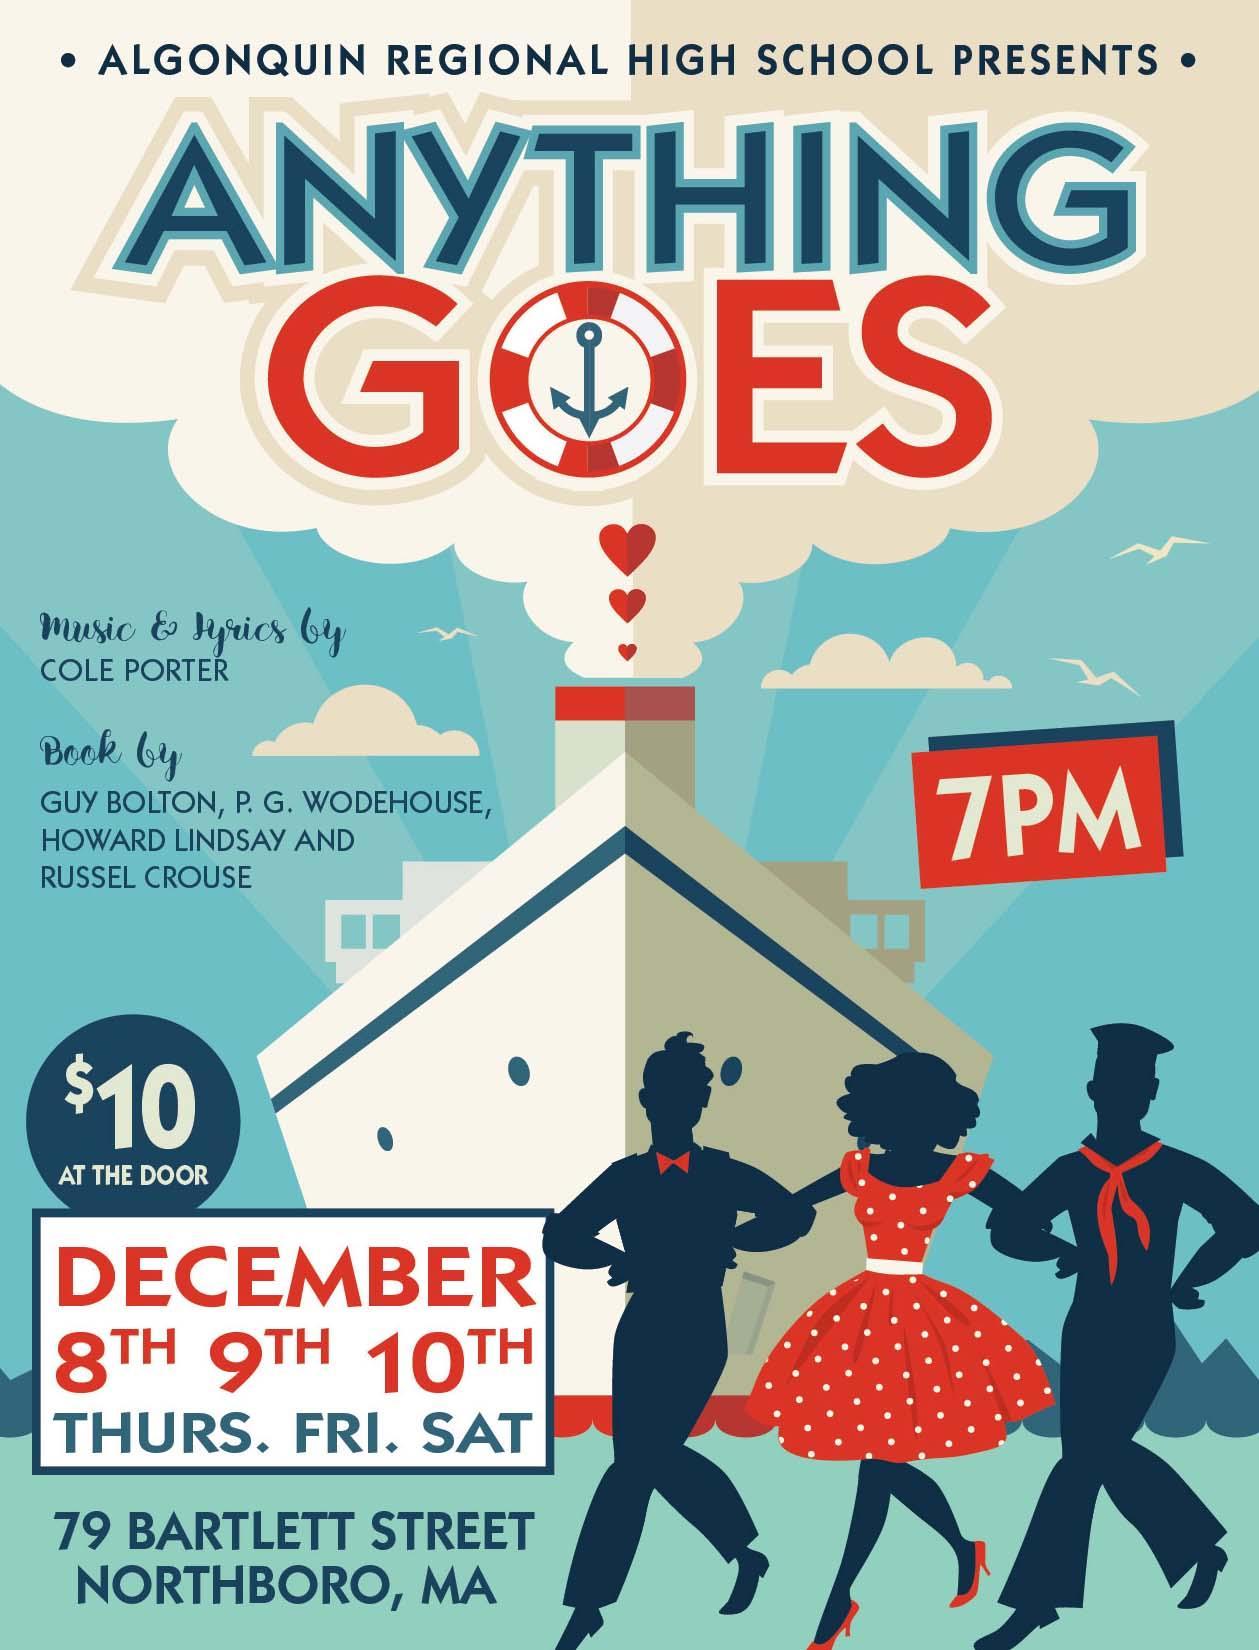 “Anything Goes” tells a tale of unrequited love, sneaky stowaways, and elaborate matchmaking all aboard one crazy cruise ship.